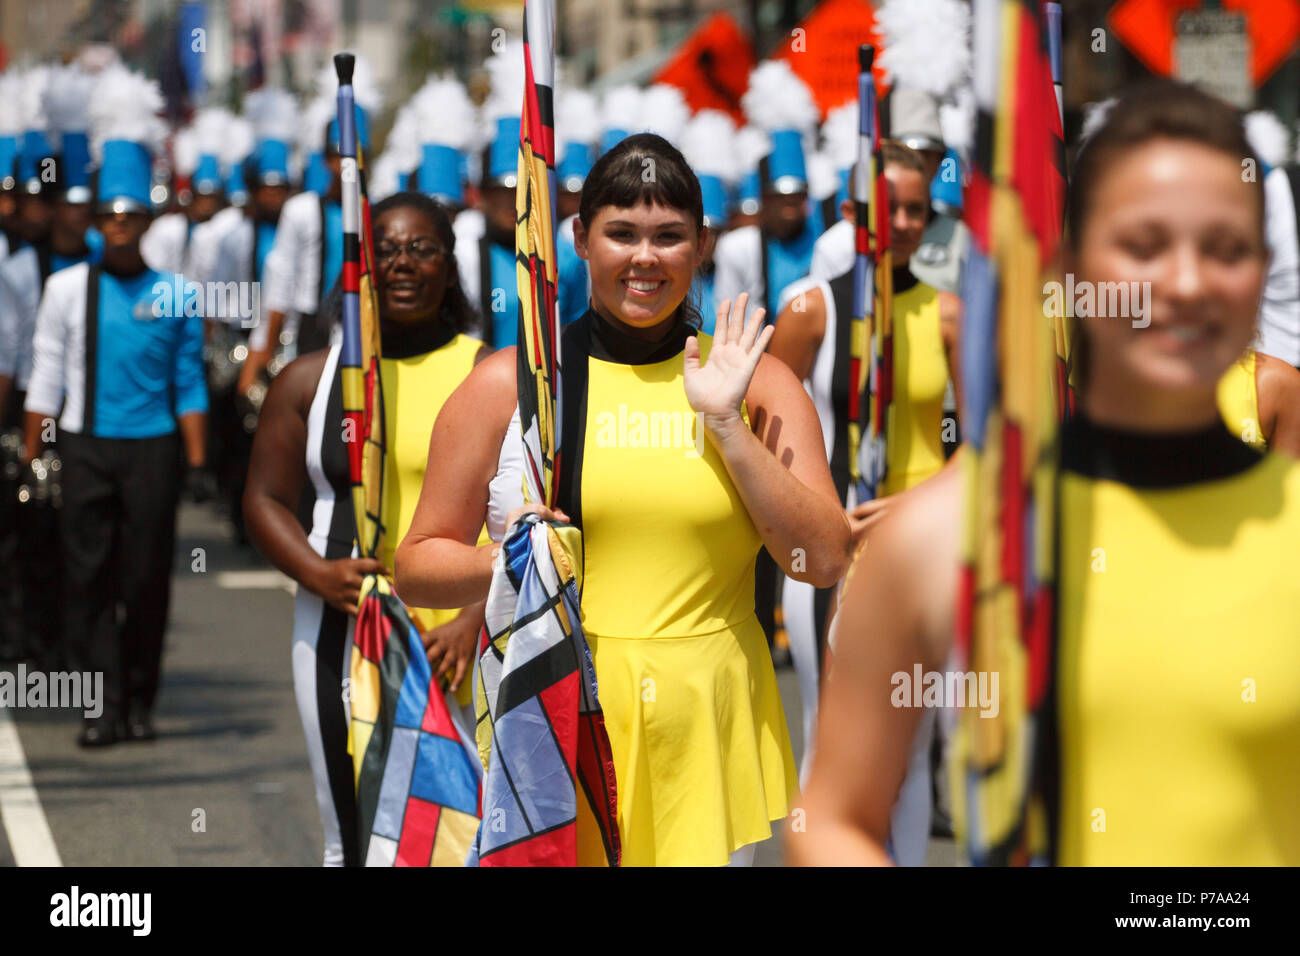 Philadelphia, Pennsylvania, USA. 4th July, 2018. Members of a marching band participate in the Independence Day Parade through the city's historic district. Credit: Michael Candelori/ZUMA Wire/Alamy Live News Stock Photo